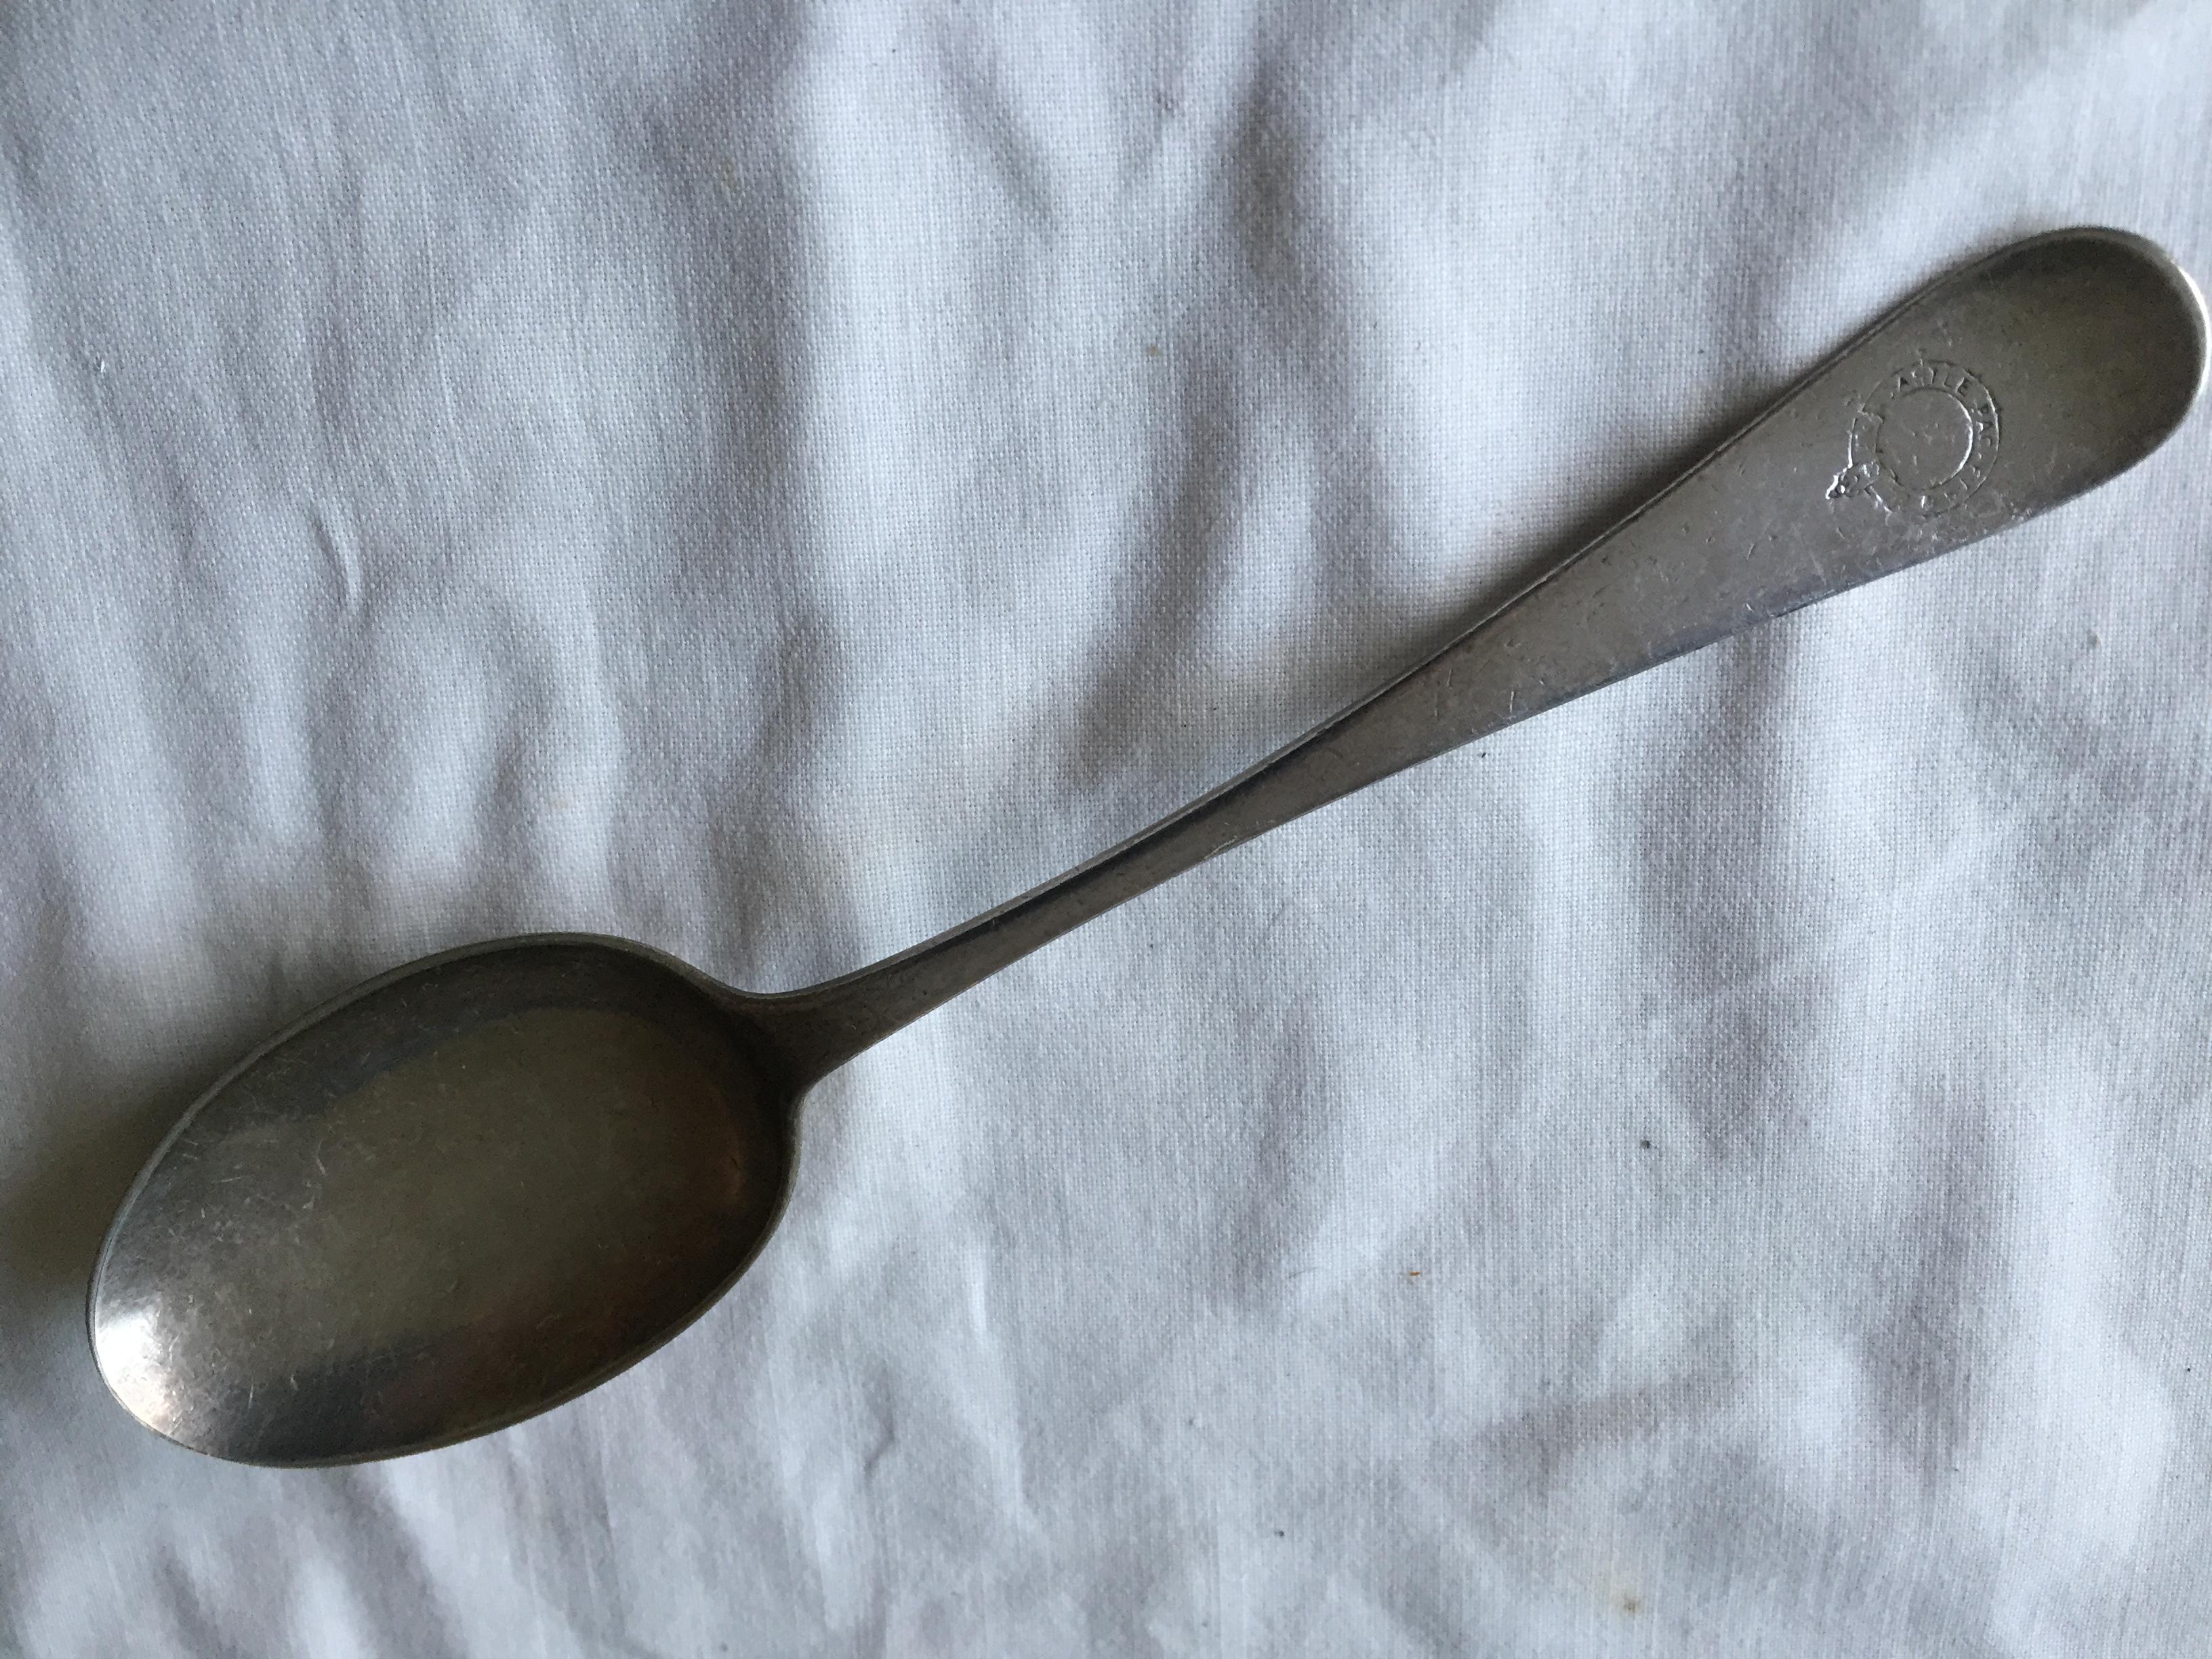 AS USED IN SERVICE DESSERT SPOON FROM THE CASTLE PACKETS SHIPPING LINE